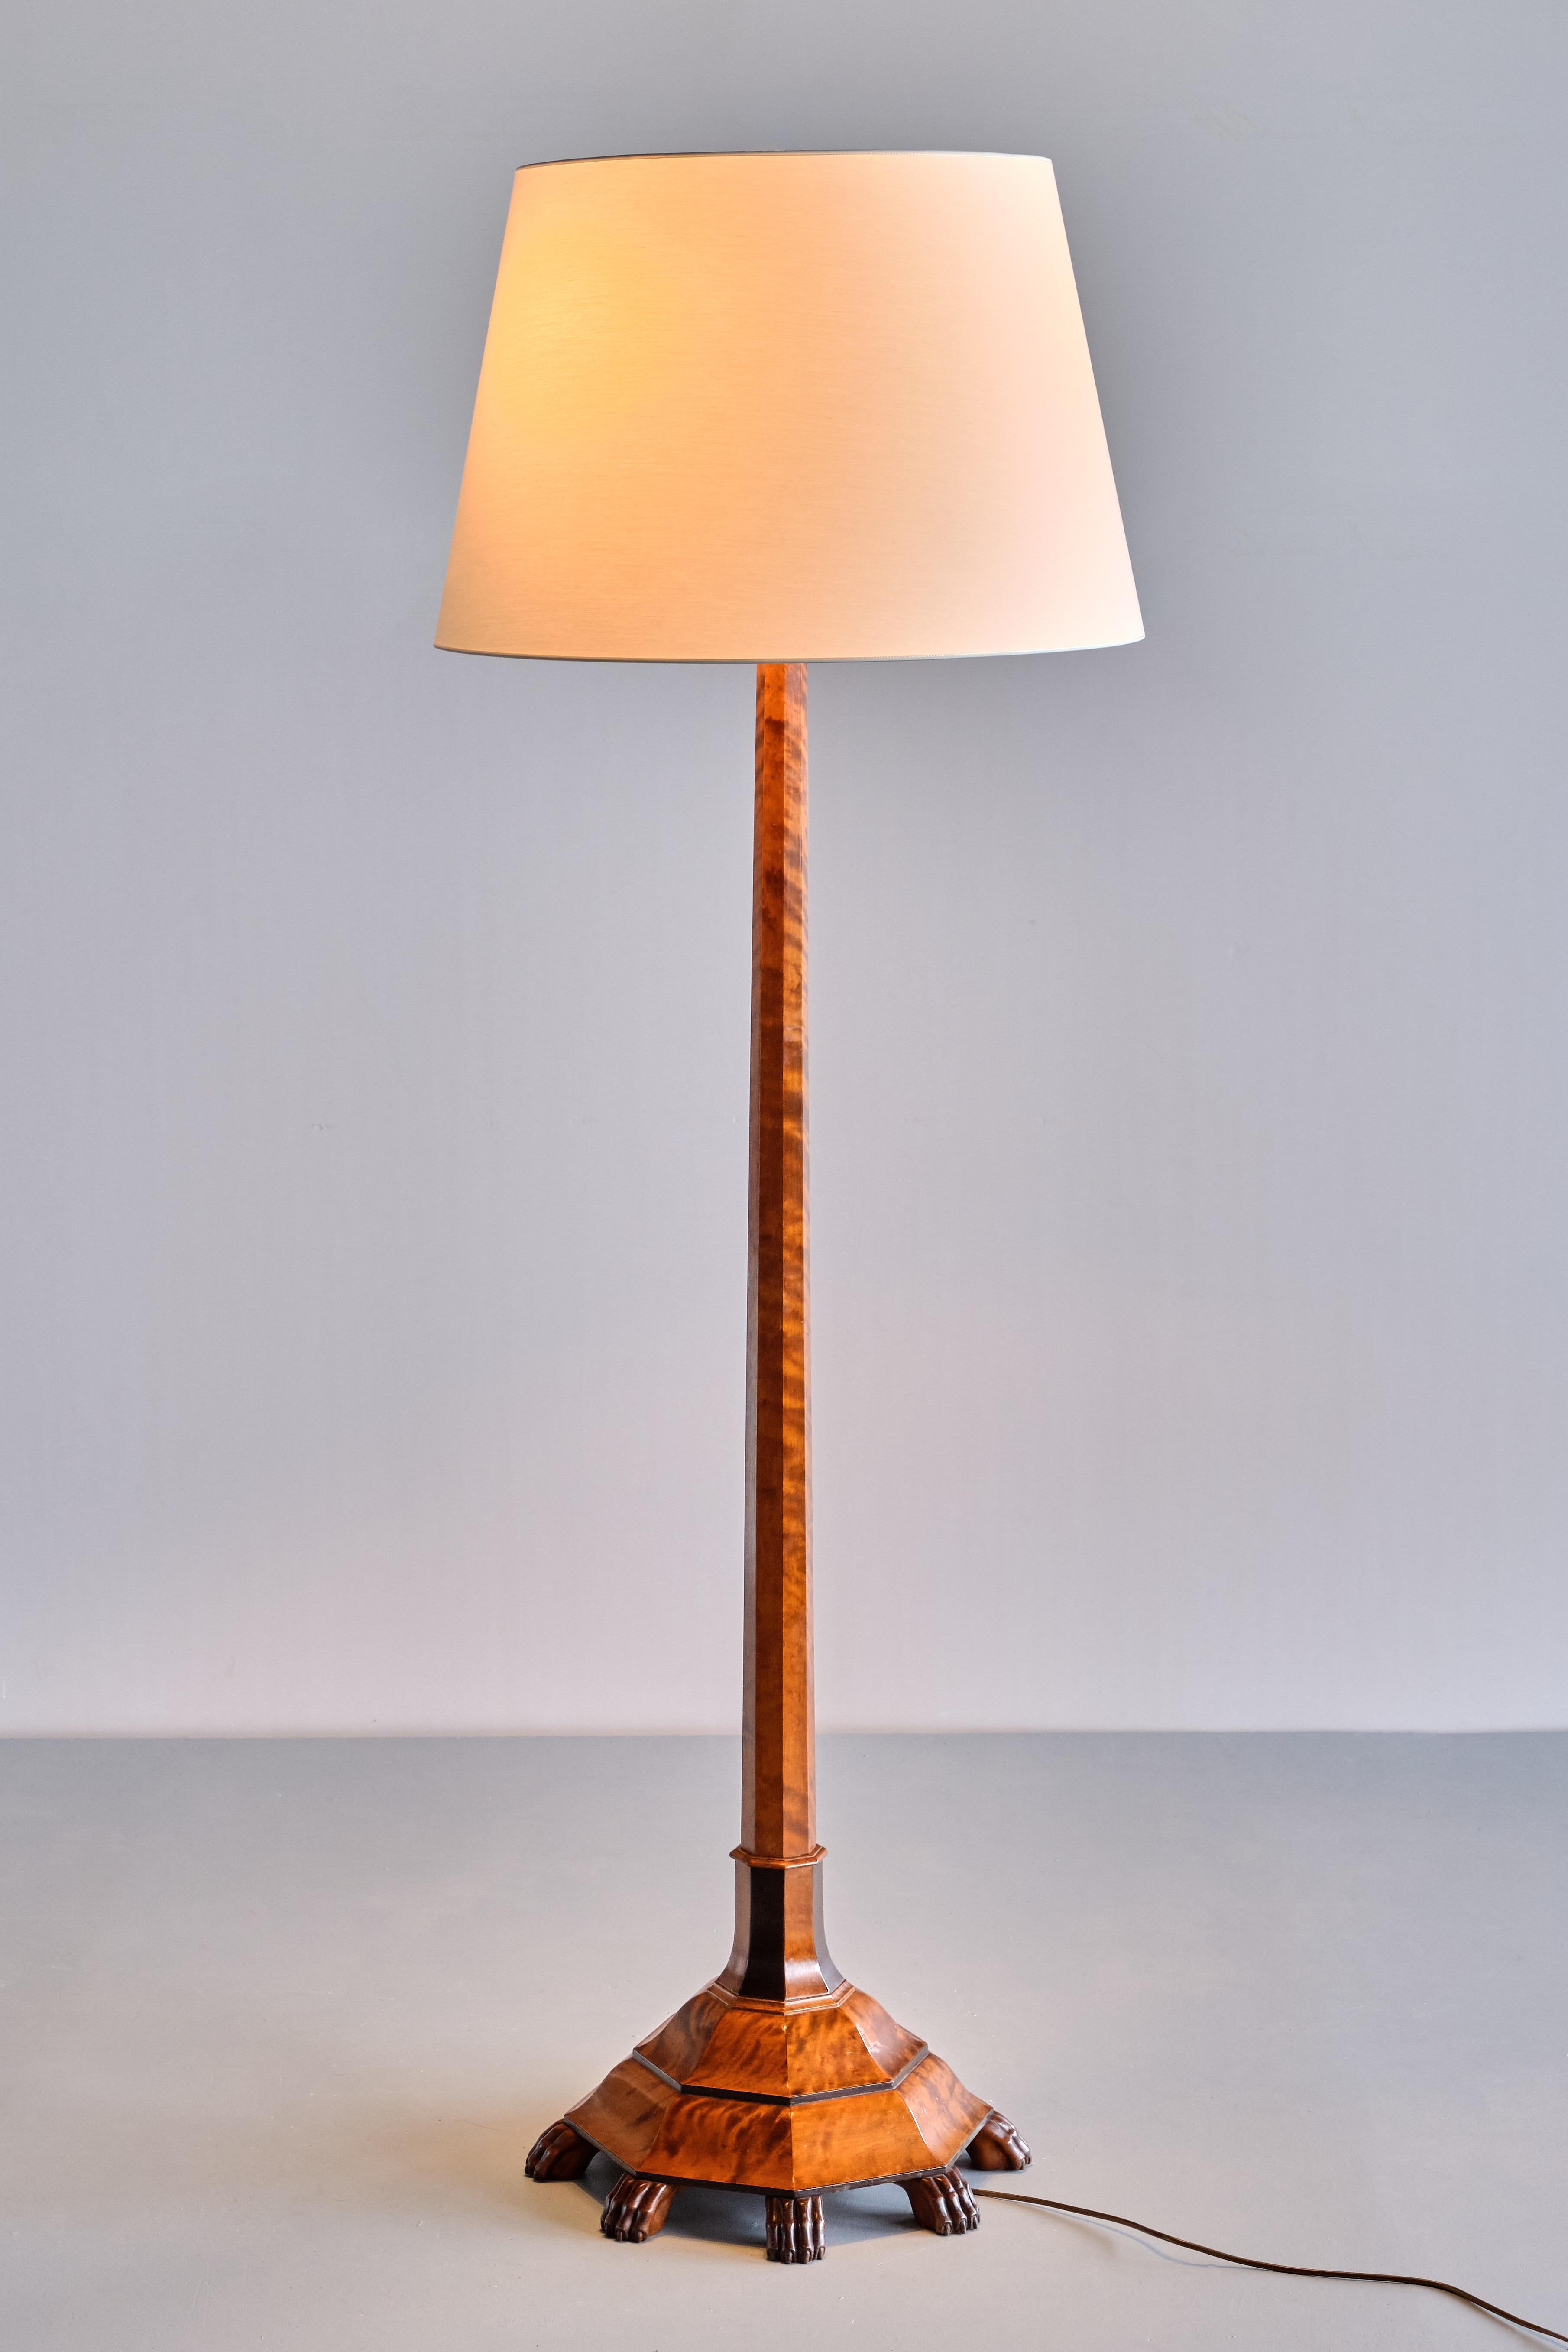 Exceptional Swedish Grace Floor Lamp in Birch with Carved Paw Feet, 1920s In Good Condition For Sale In The Hague, NL